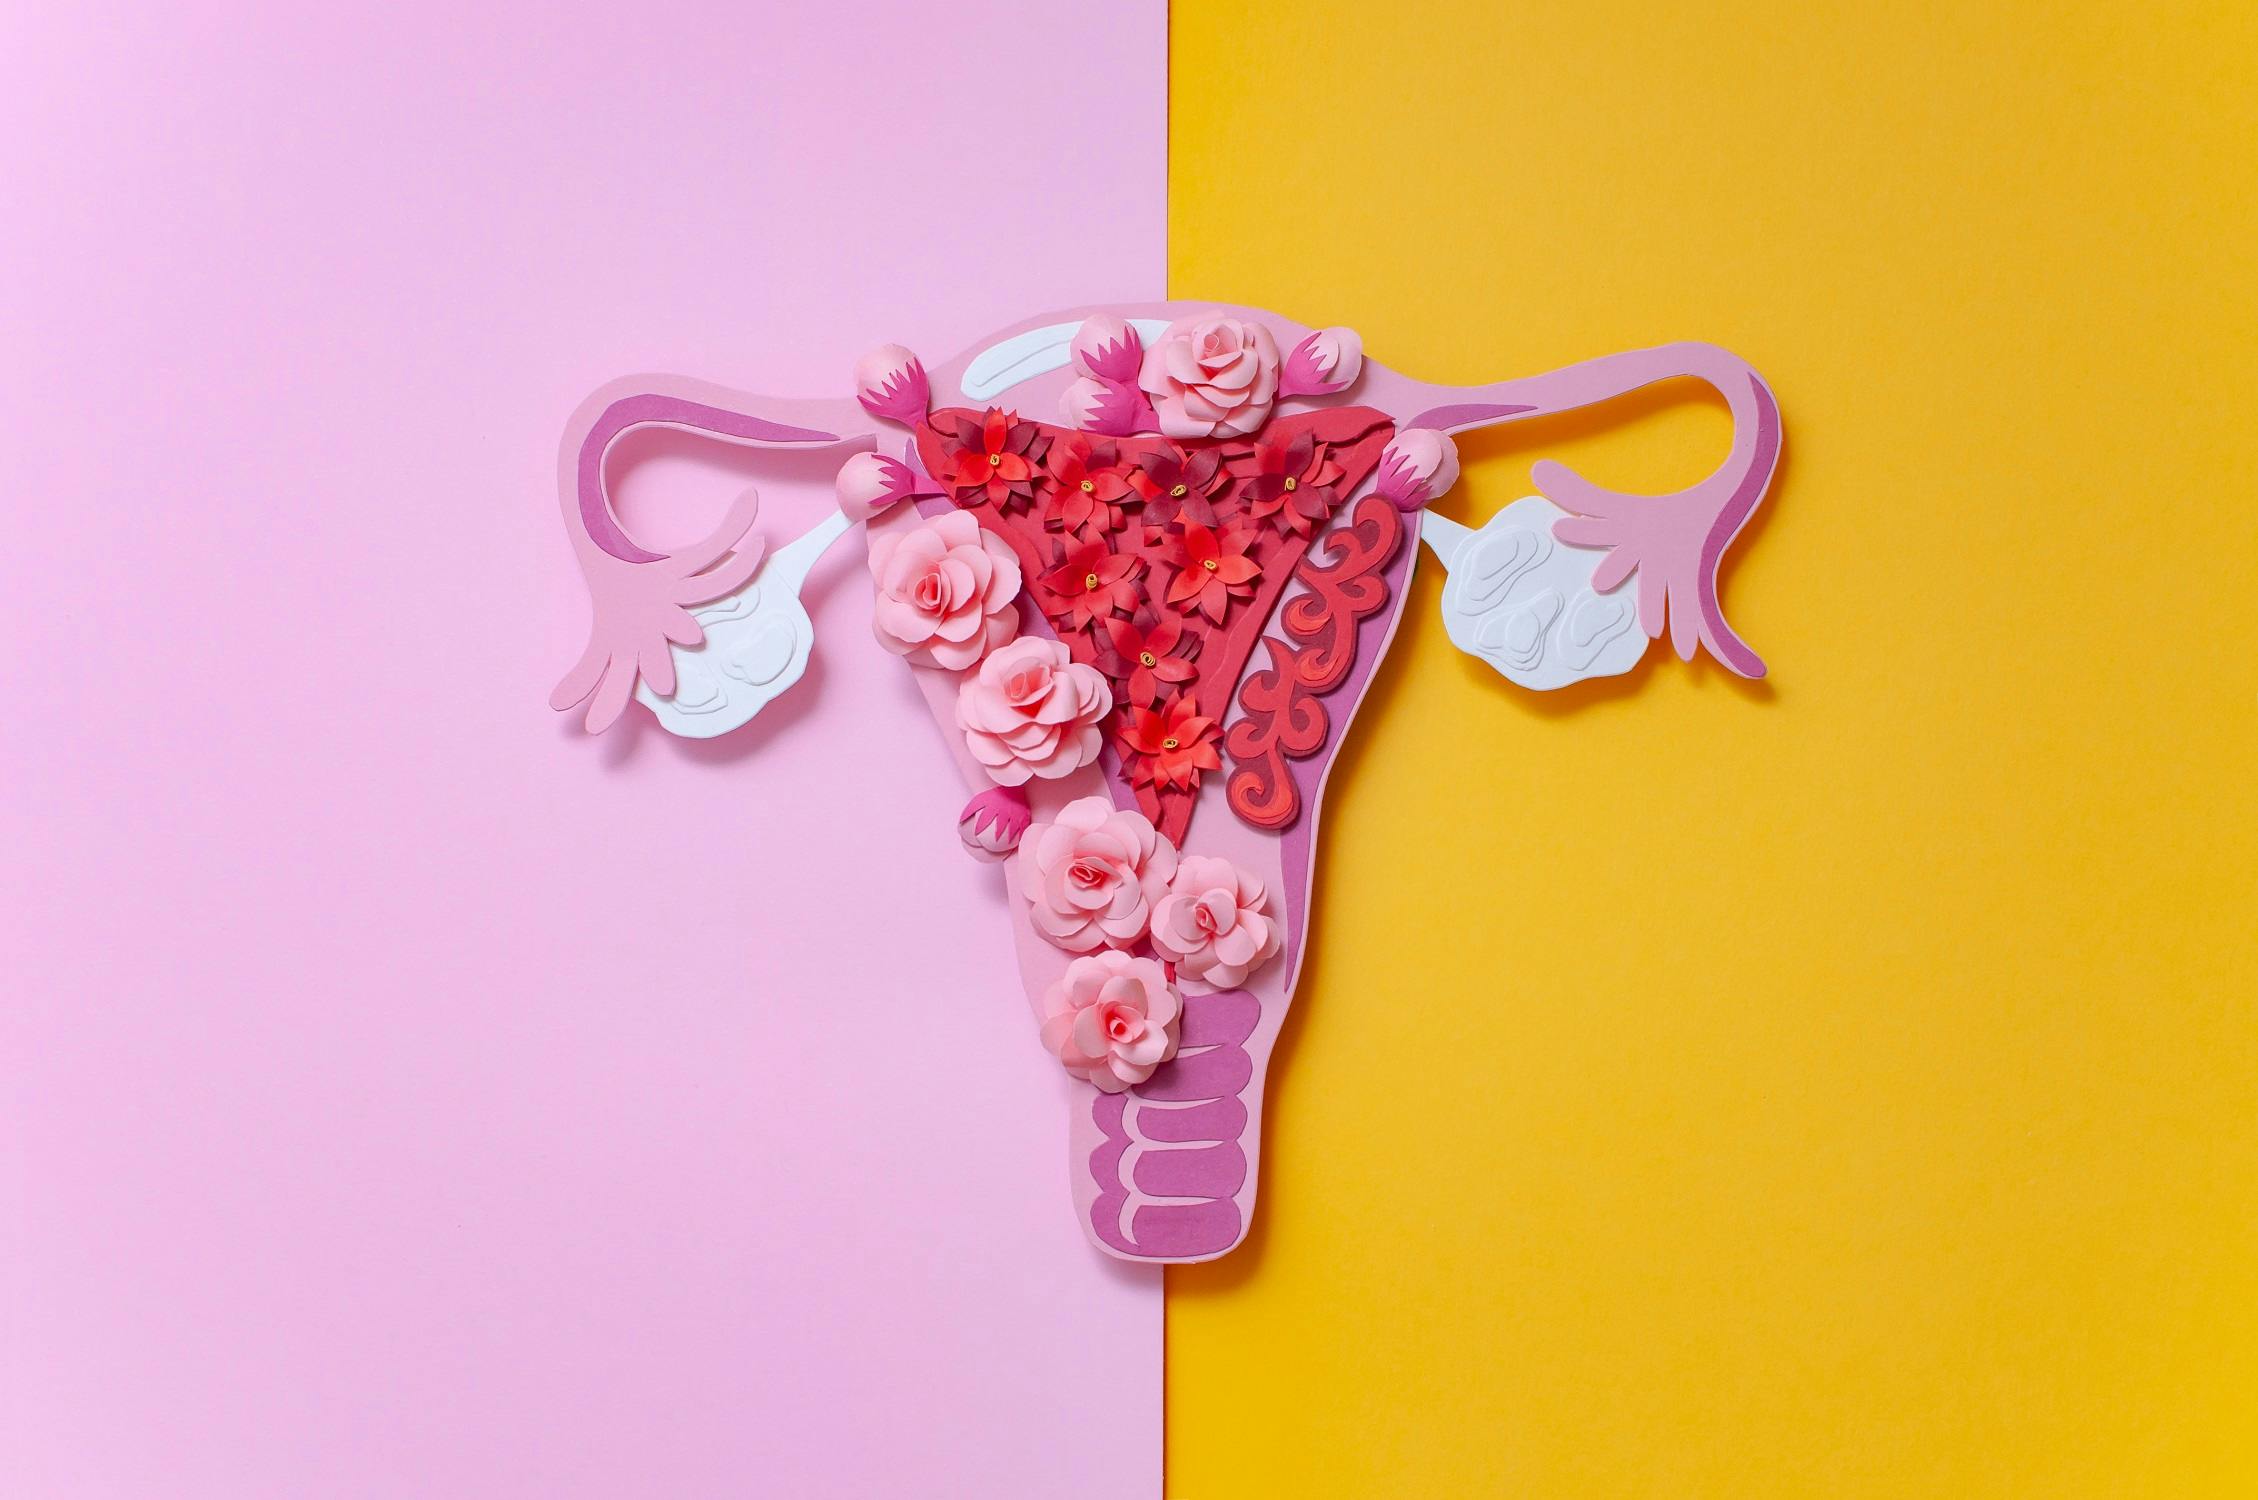 Paper art of a uterus with flowers on a divided pink and yellow background.